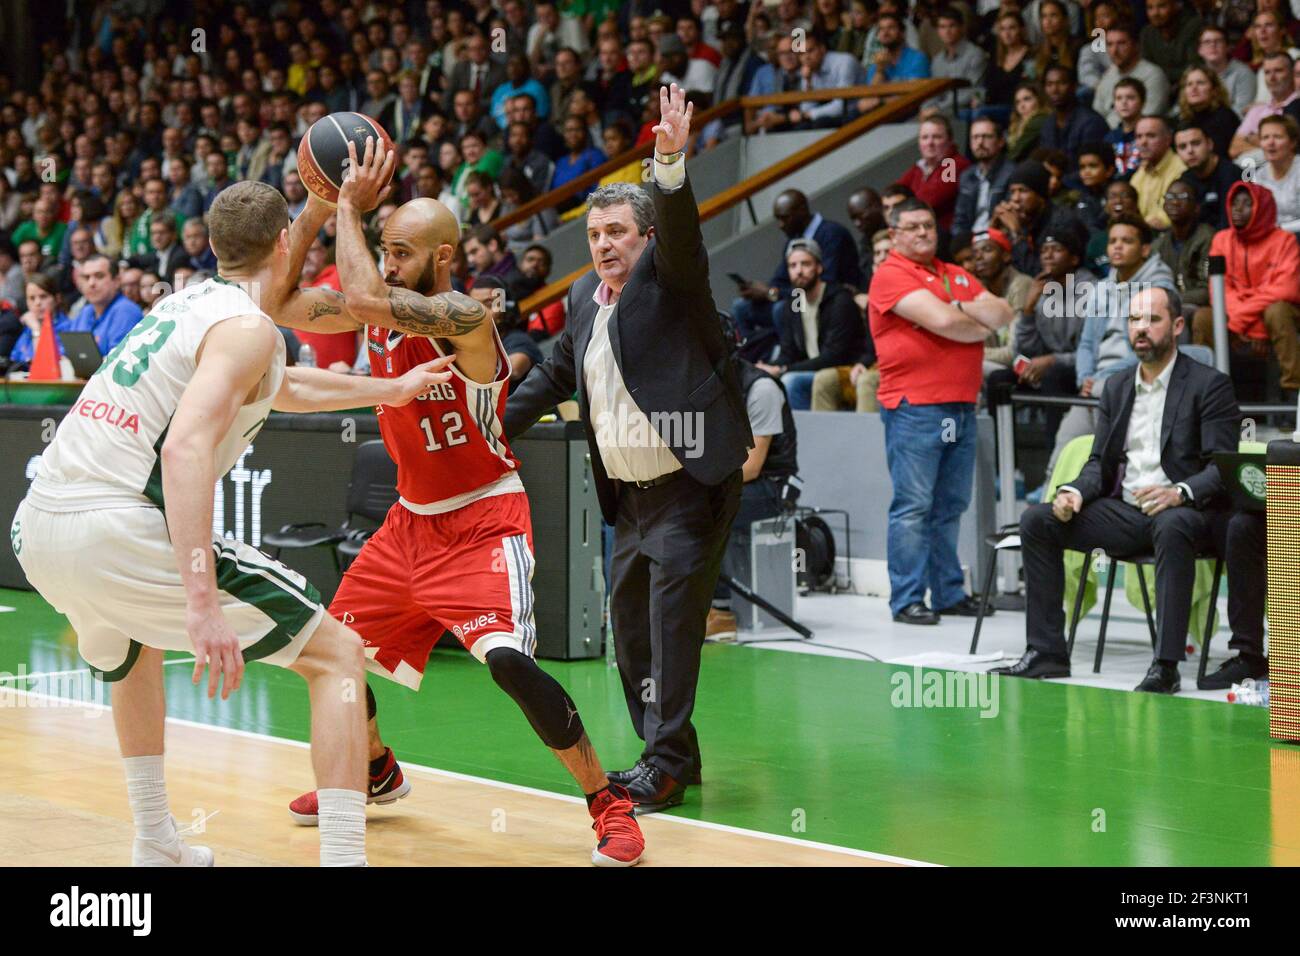 Pascal Donnadieu, coach of Nanterre 92 gestures during the French  Championship Pro A Basketball match between Nanterre 92 and SIG Strasbourg  on October 30, 2017 at Palais des Sports Maurice Thorez in